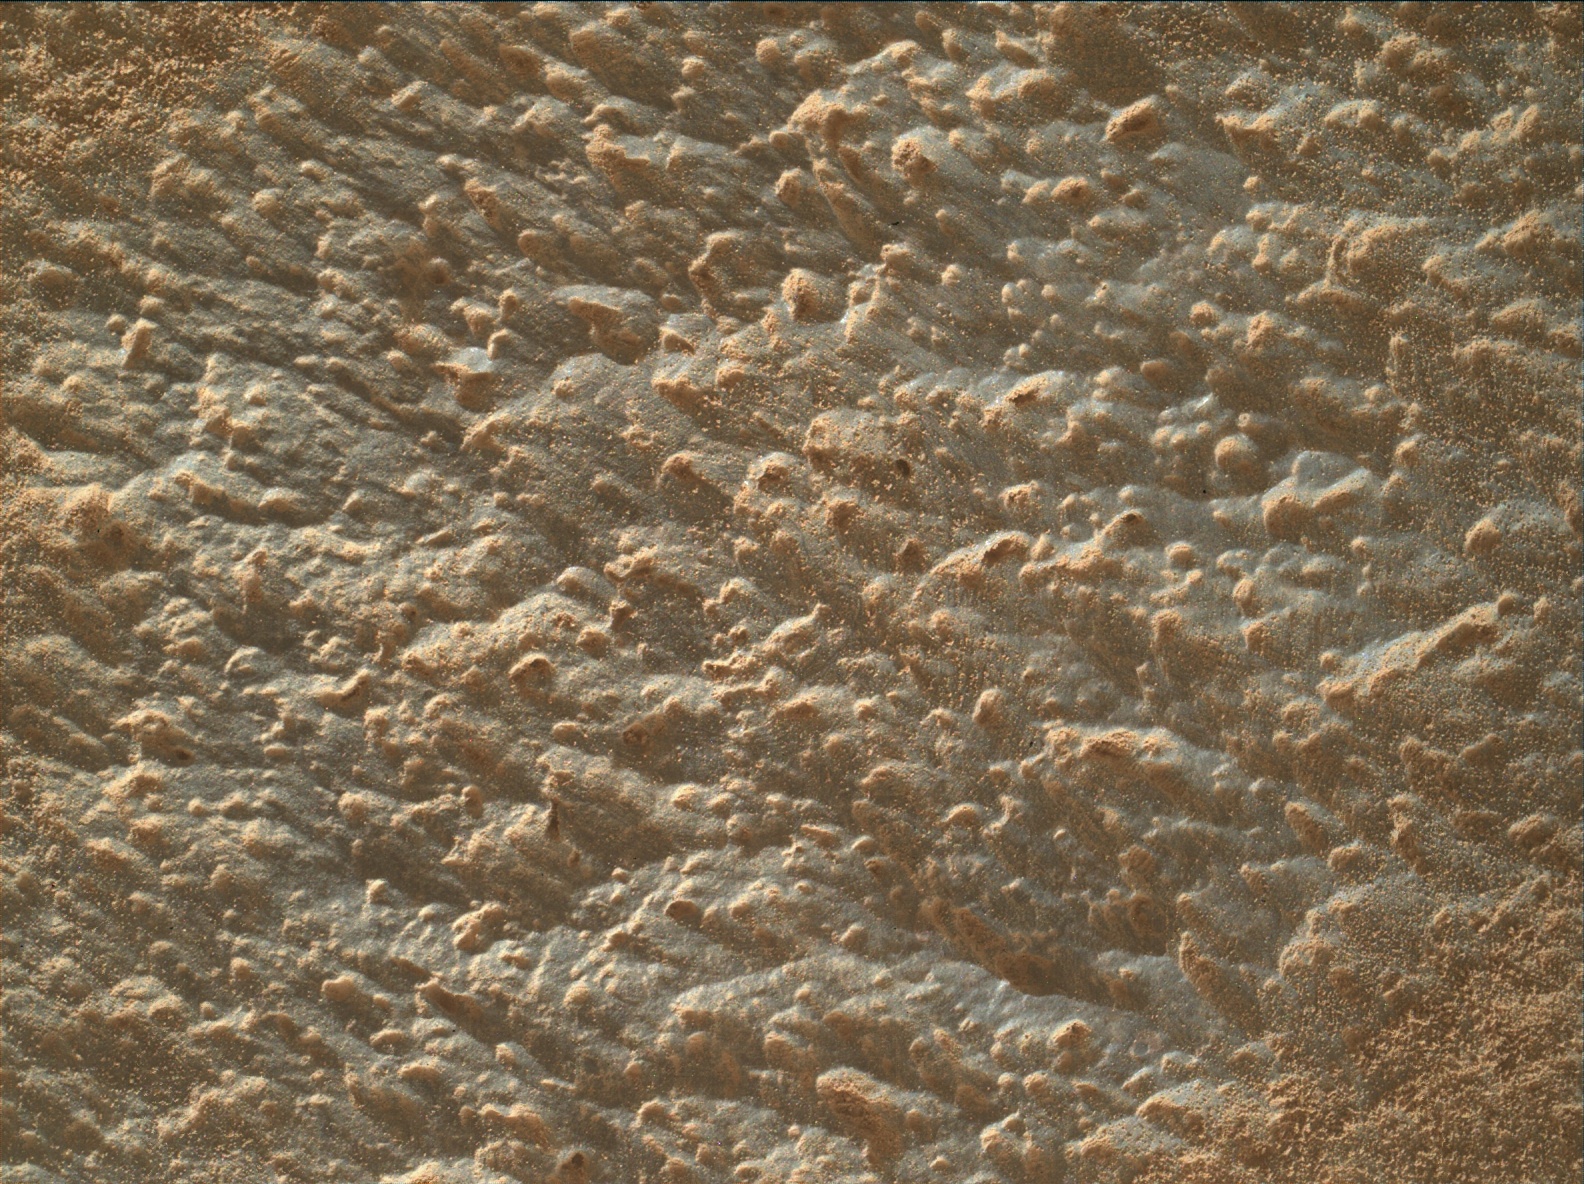 Nasa's Mars rover Curiosity acquired this image using its Mars Hand Lens Imager (MAHLI) on Sol 3427